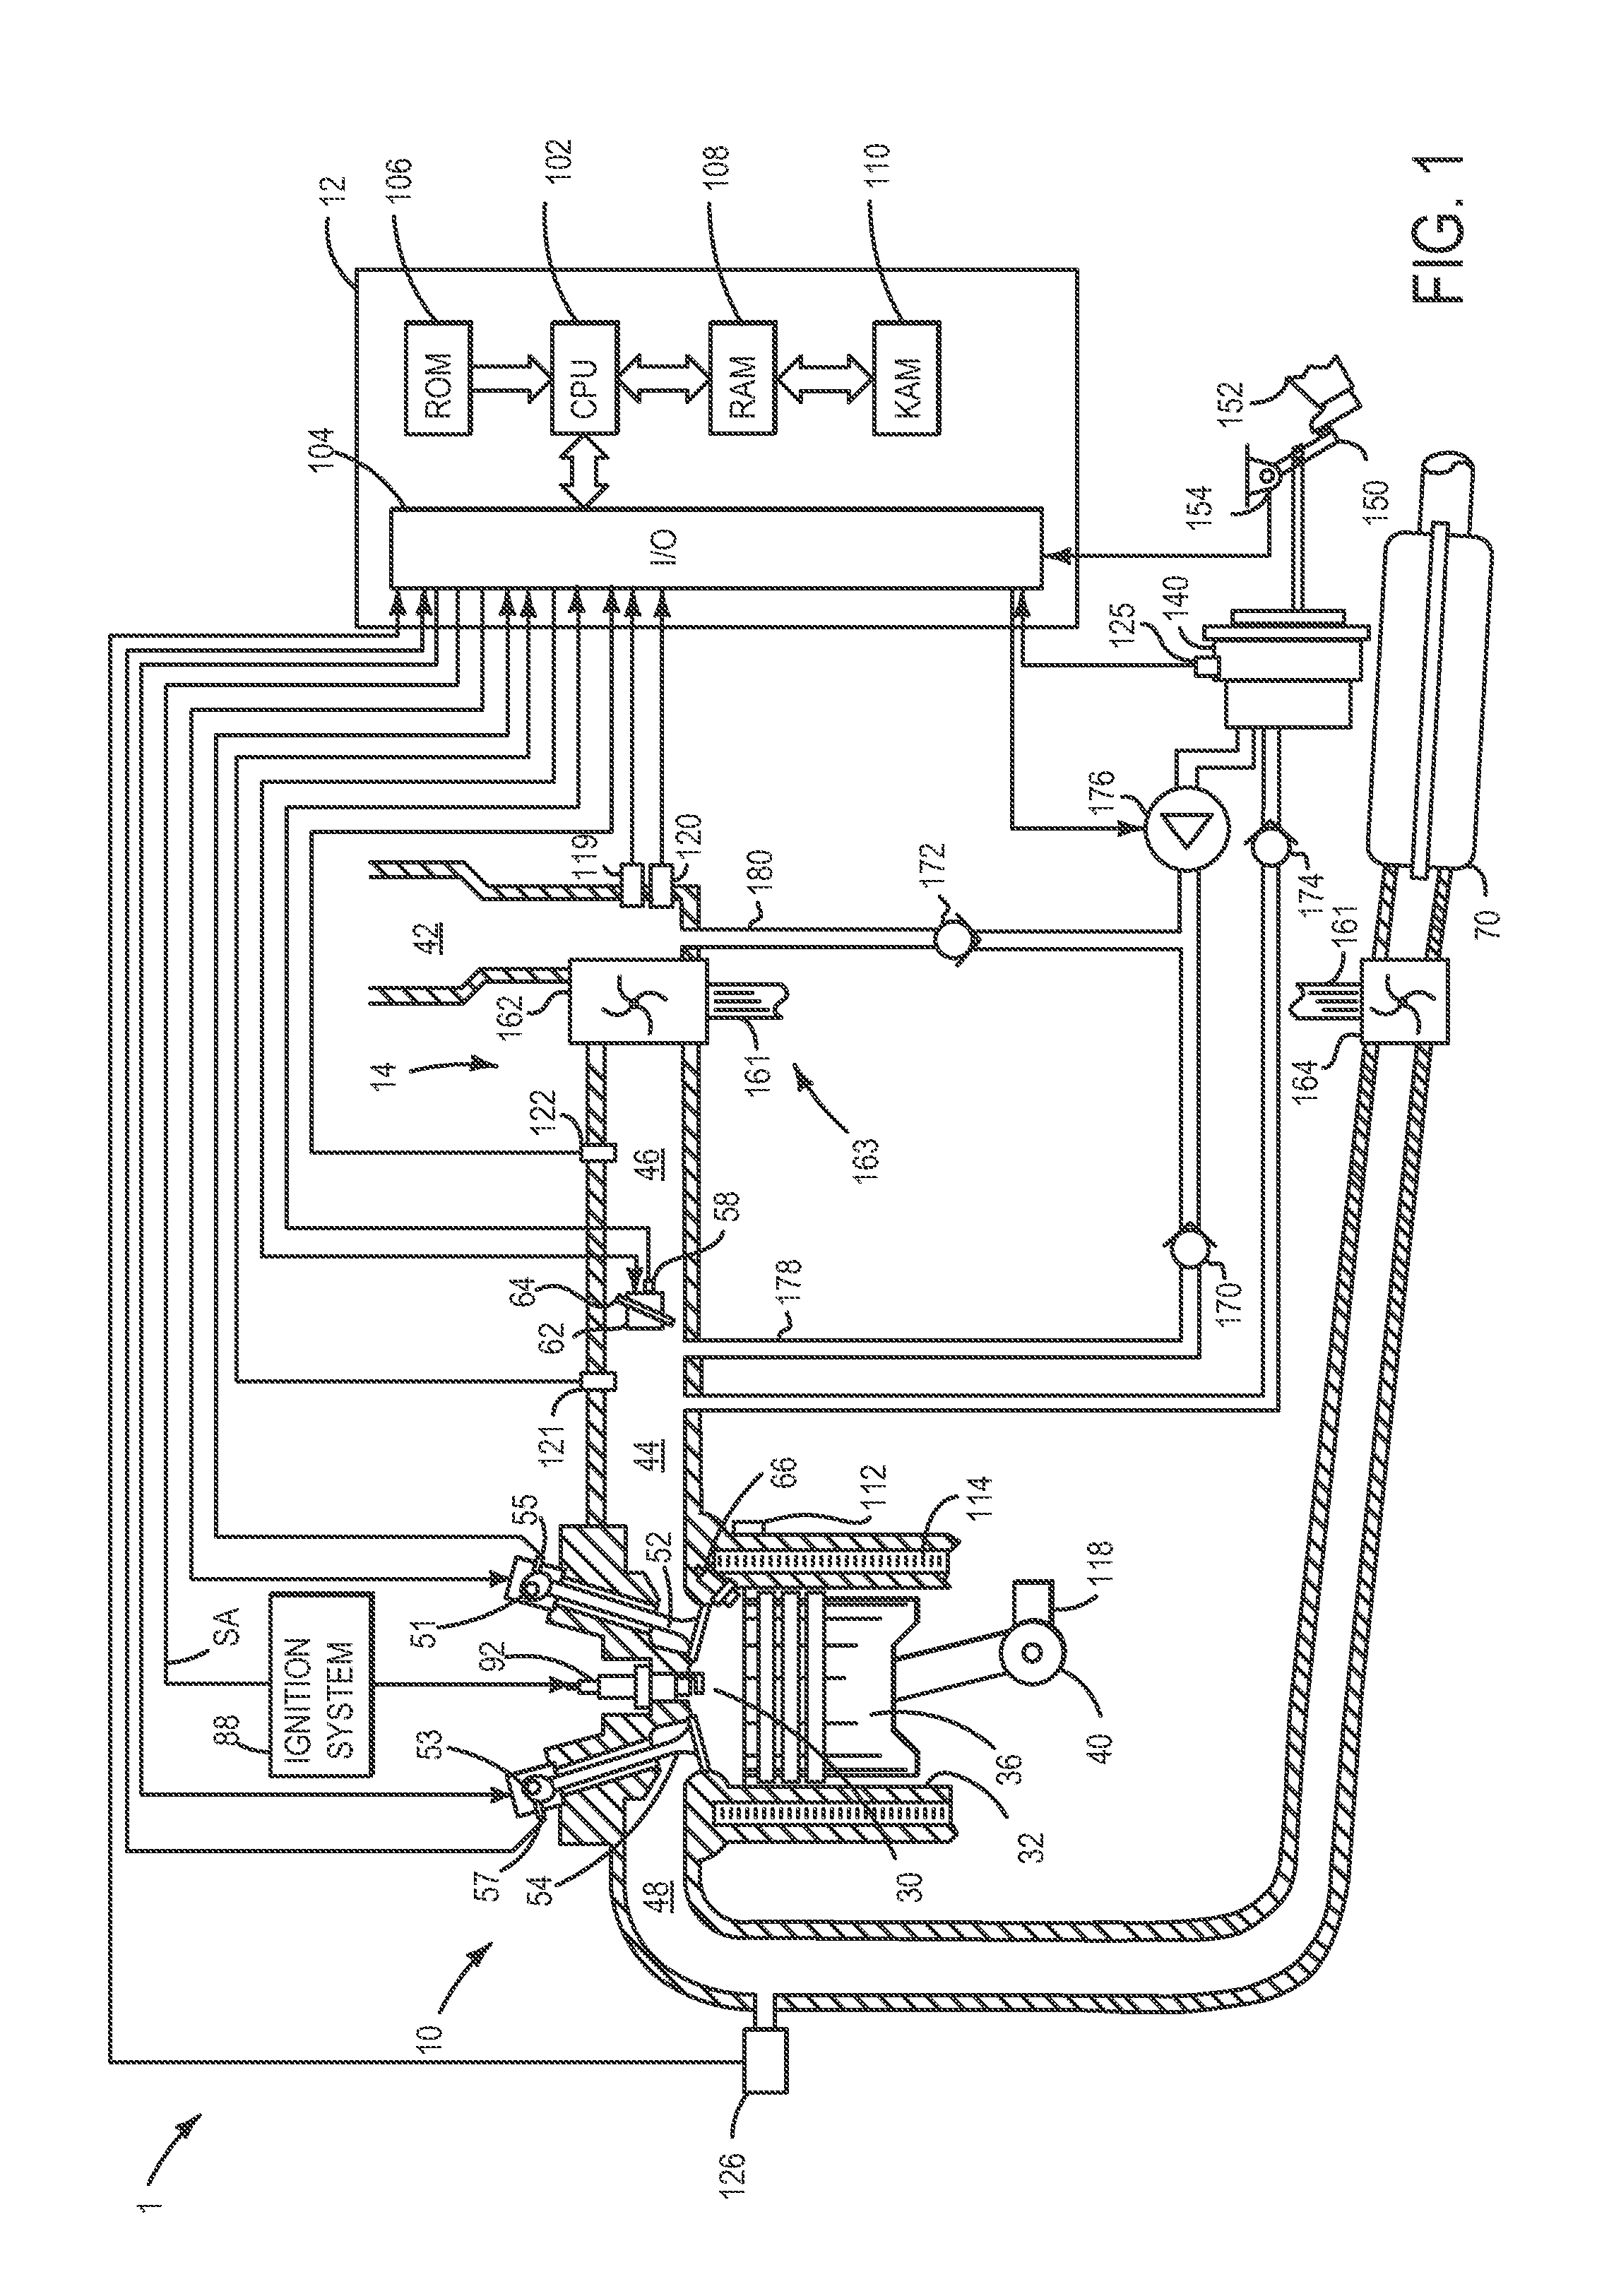 Electrically driven vacuum pump for a vehicle